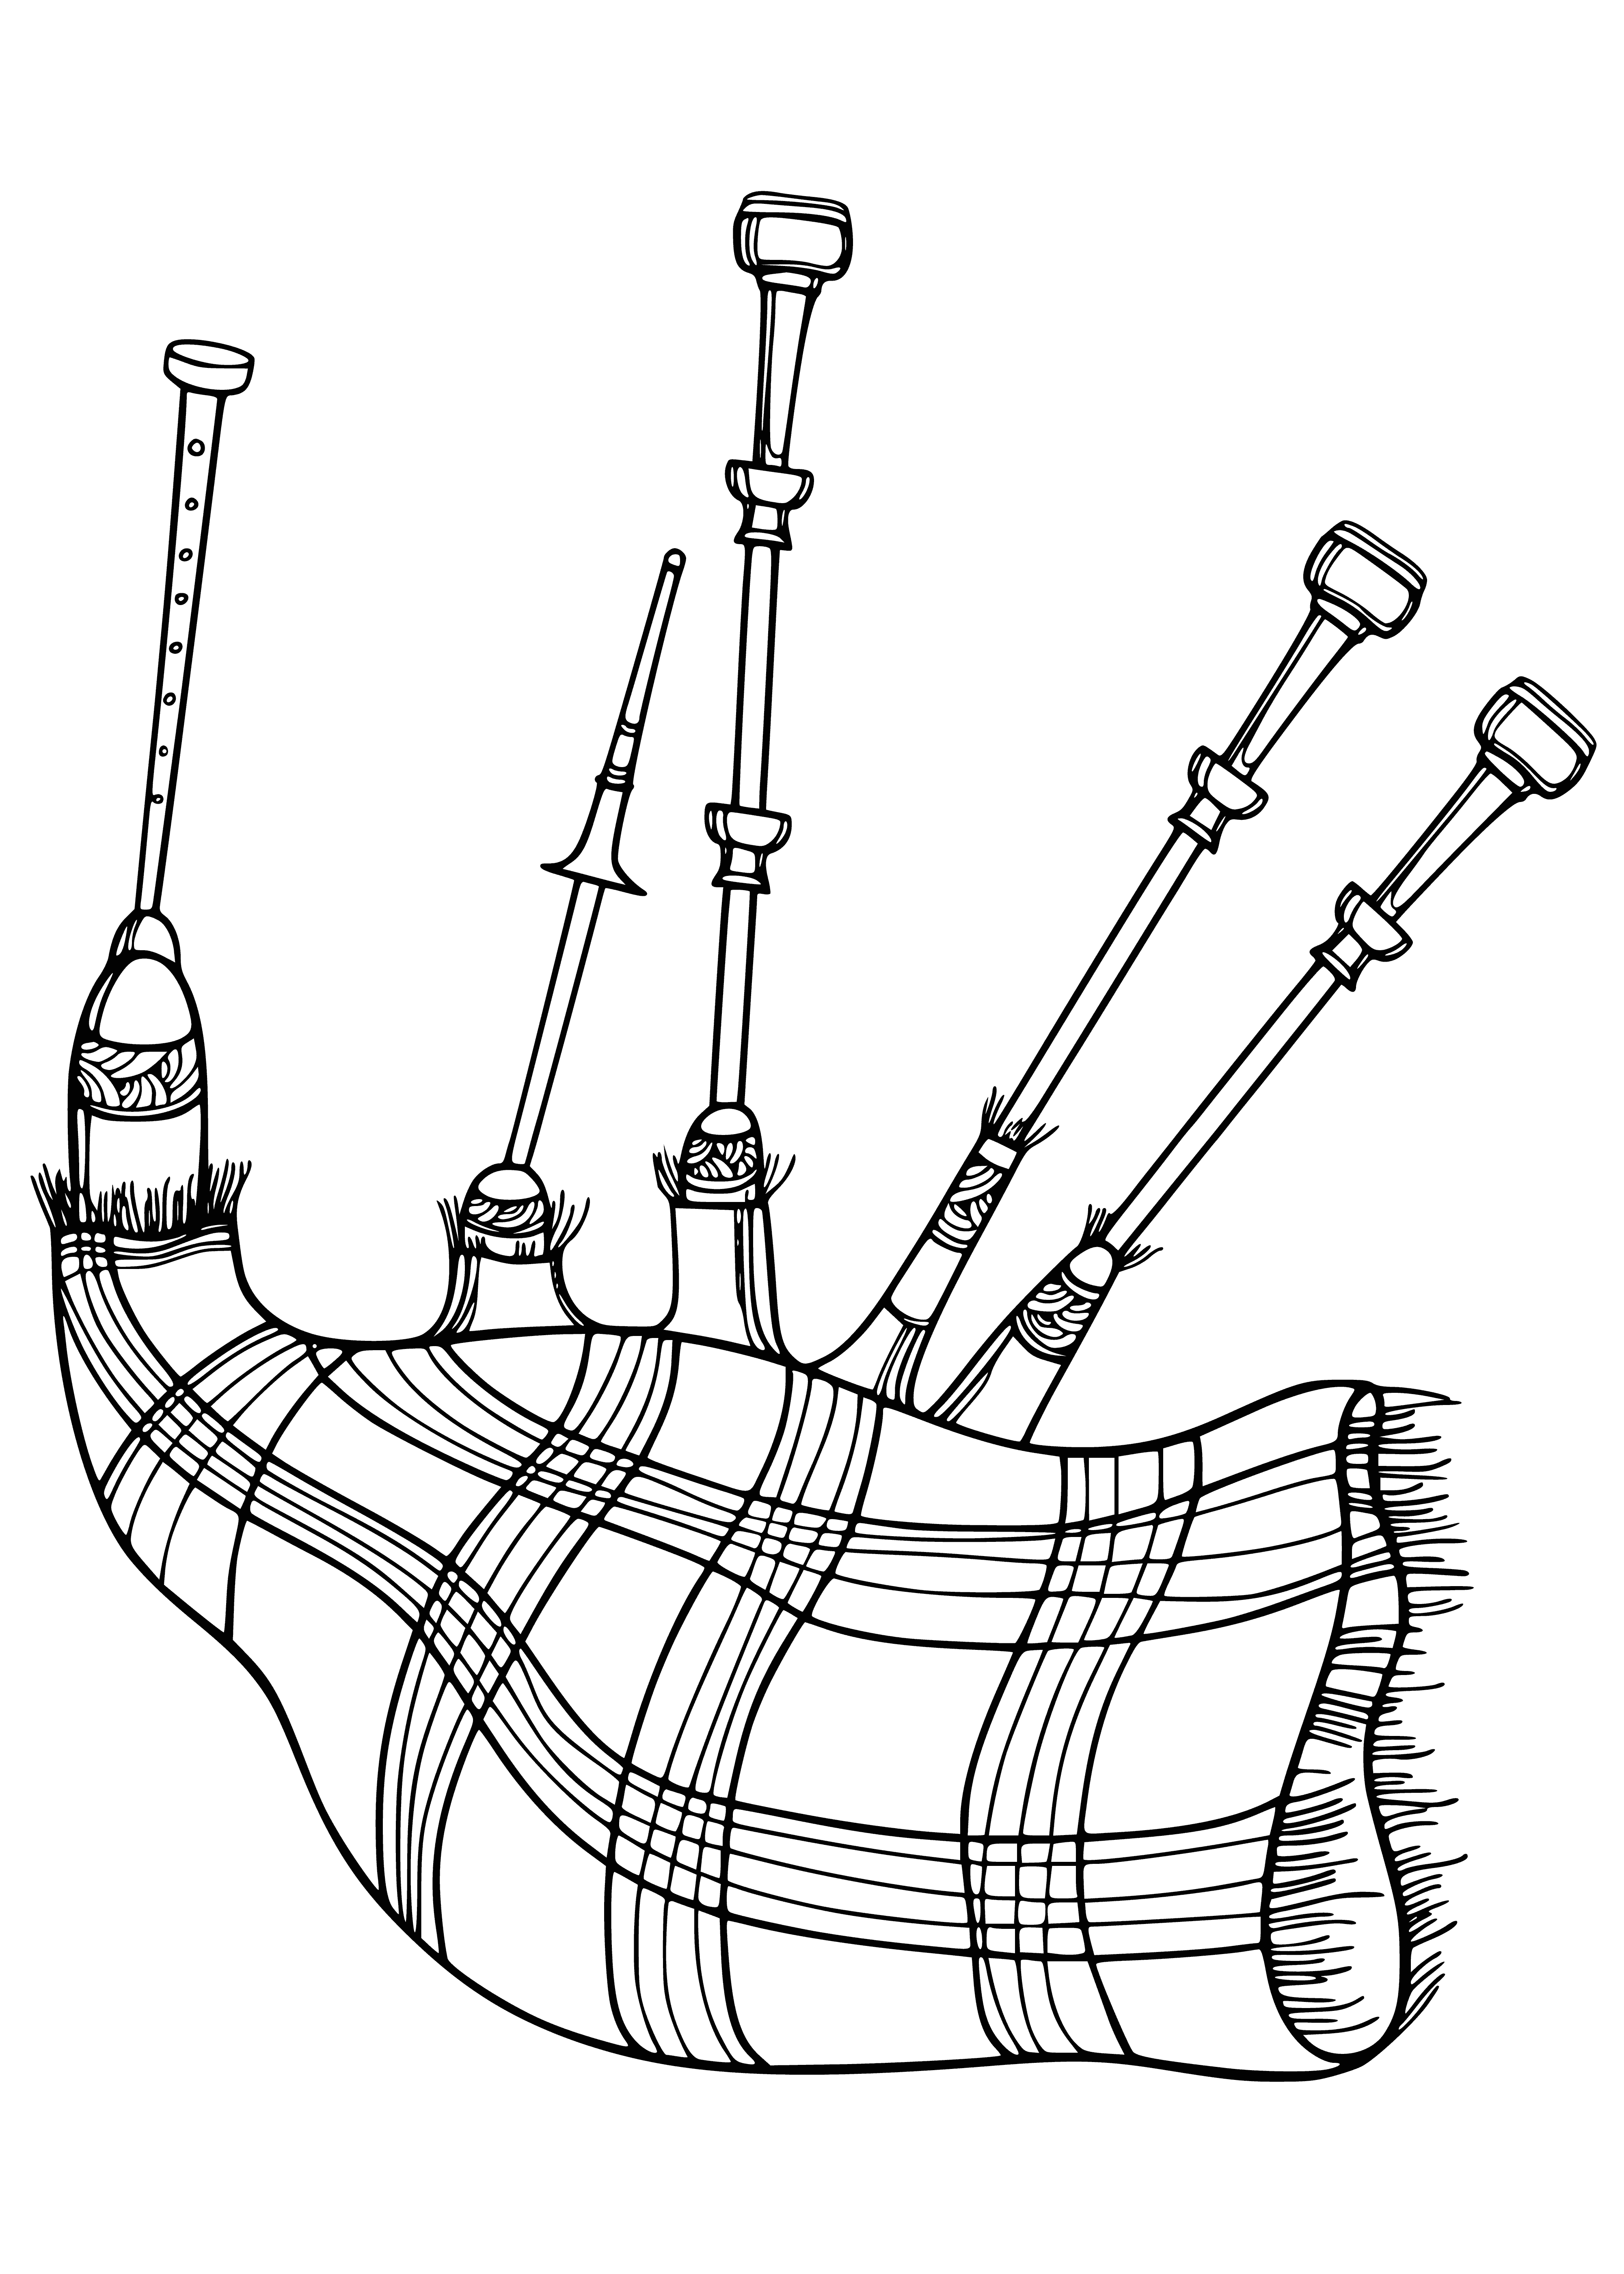 Bagpipe coloring page